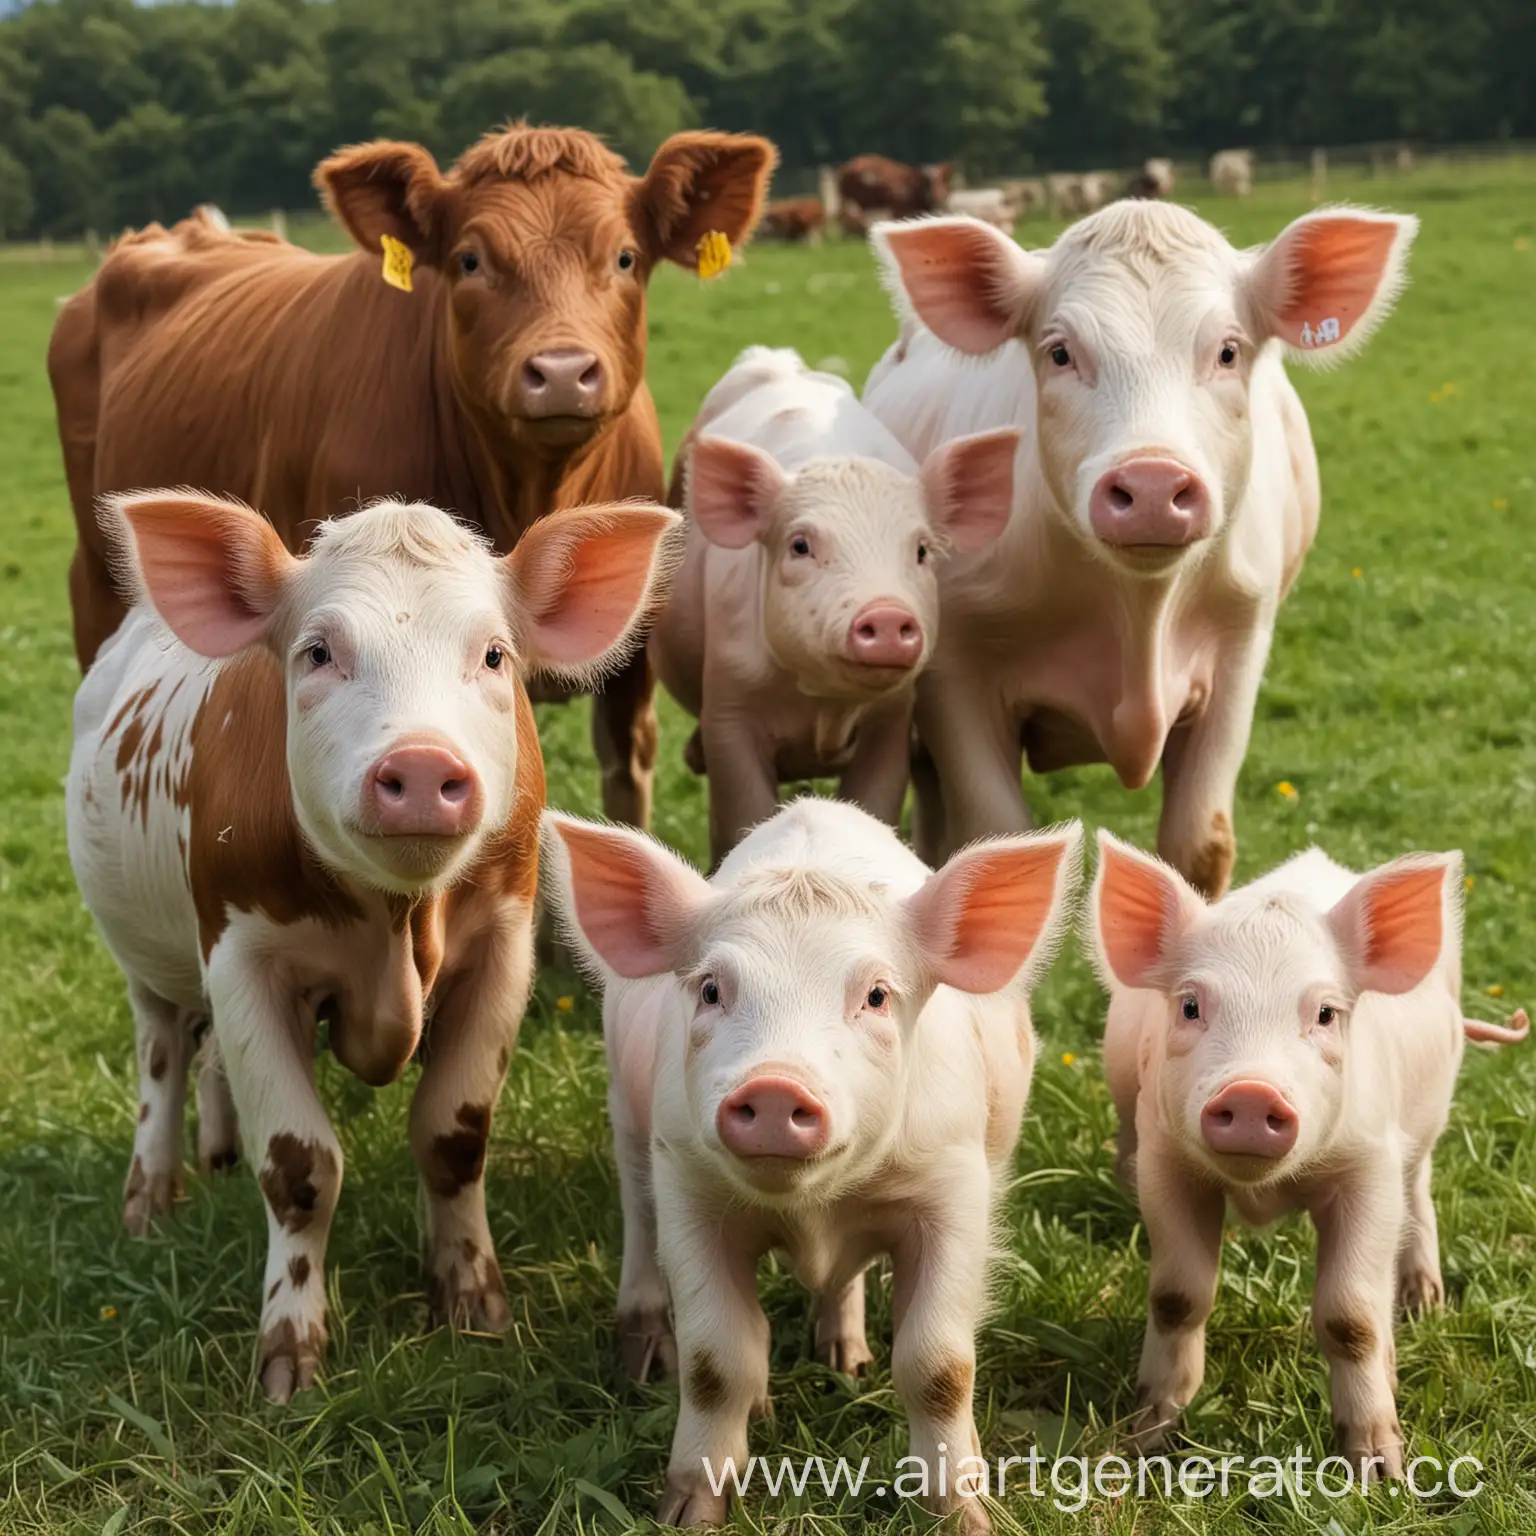 Cheerful-Cows-and-Pigs-Grazing-in-Lush-Pasture